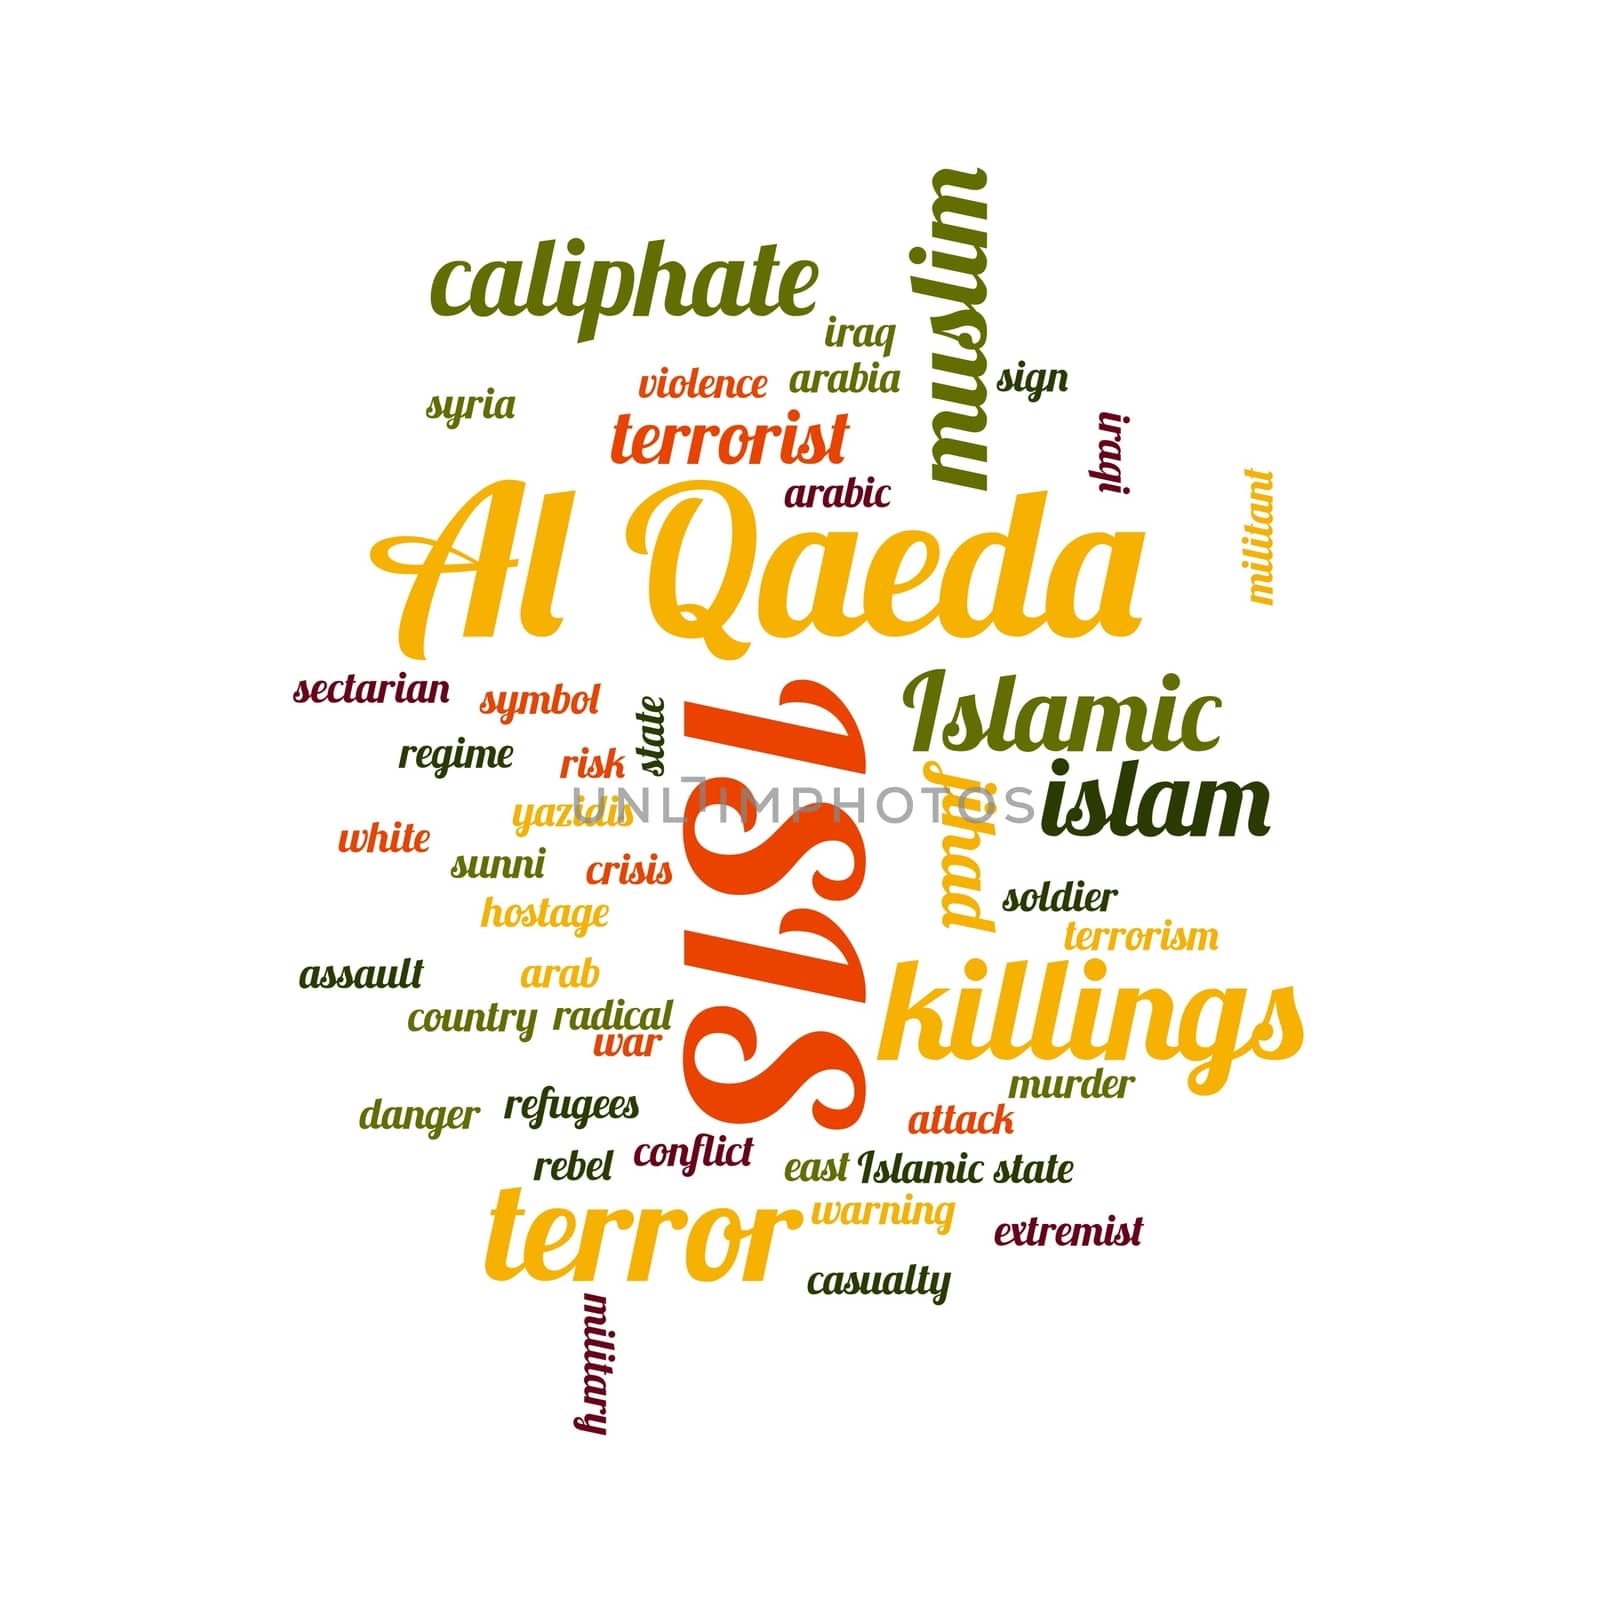 ISIS and Al Qaeda word cloud on white background.